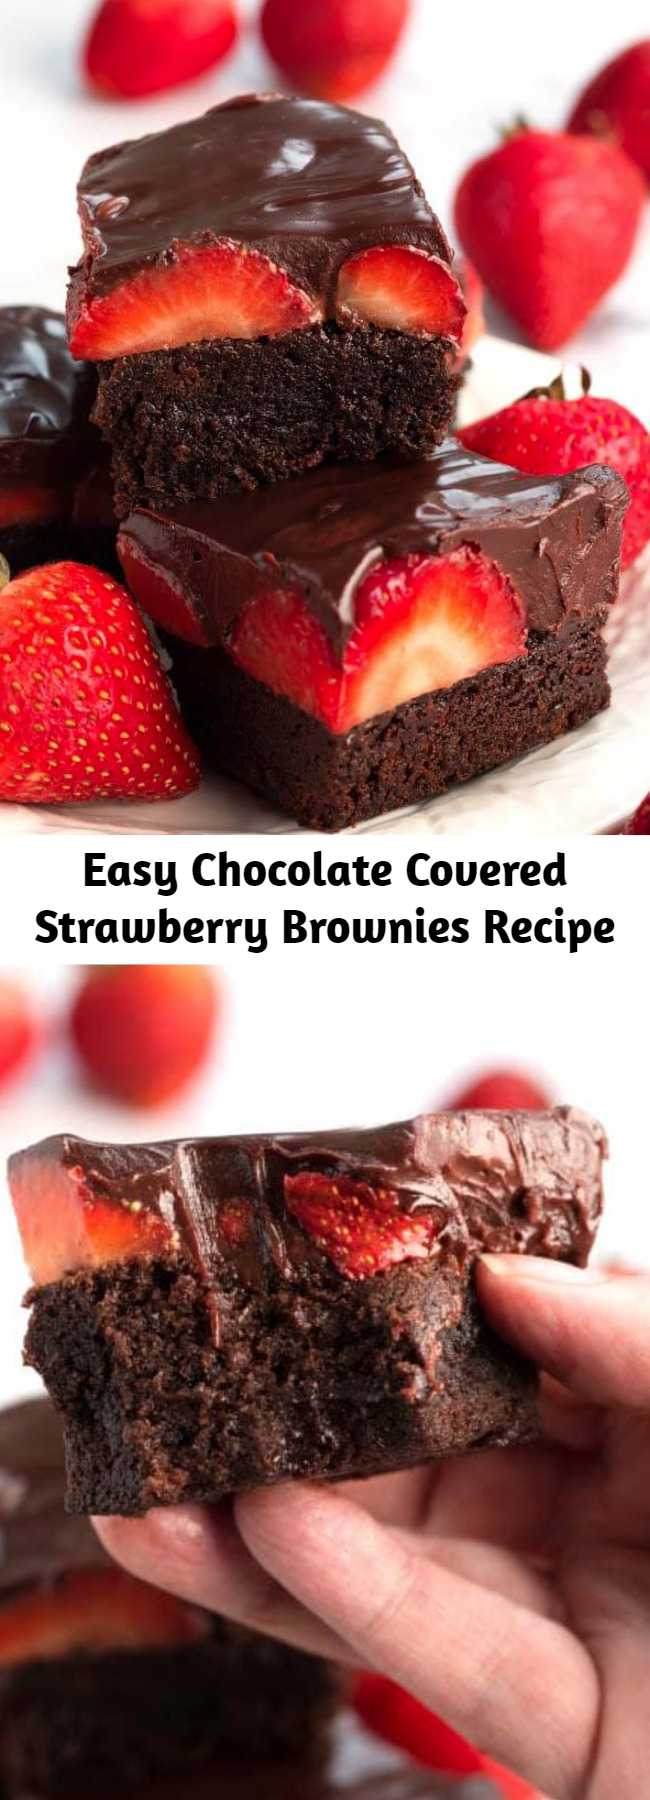 Easy Chocolate Covered Strawberry Brownies Recipe - Chocolate Covered Strawberry Brownies are a delicious, chocolatey dessert recipe. If you like rich, chocolate brownies, then you will love these chocolate ganache strawberry covered brownies! #brownies #chocolate #chocolatecoveredstrawberries